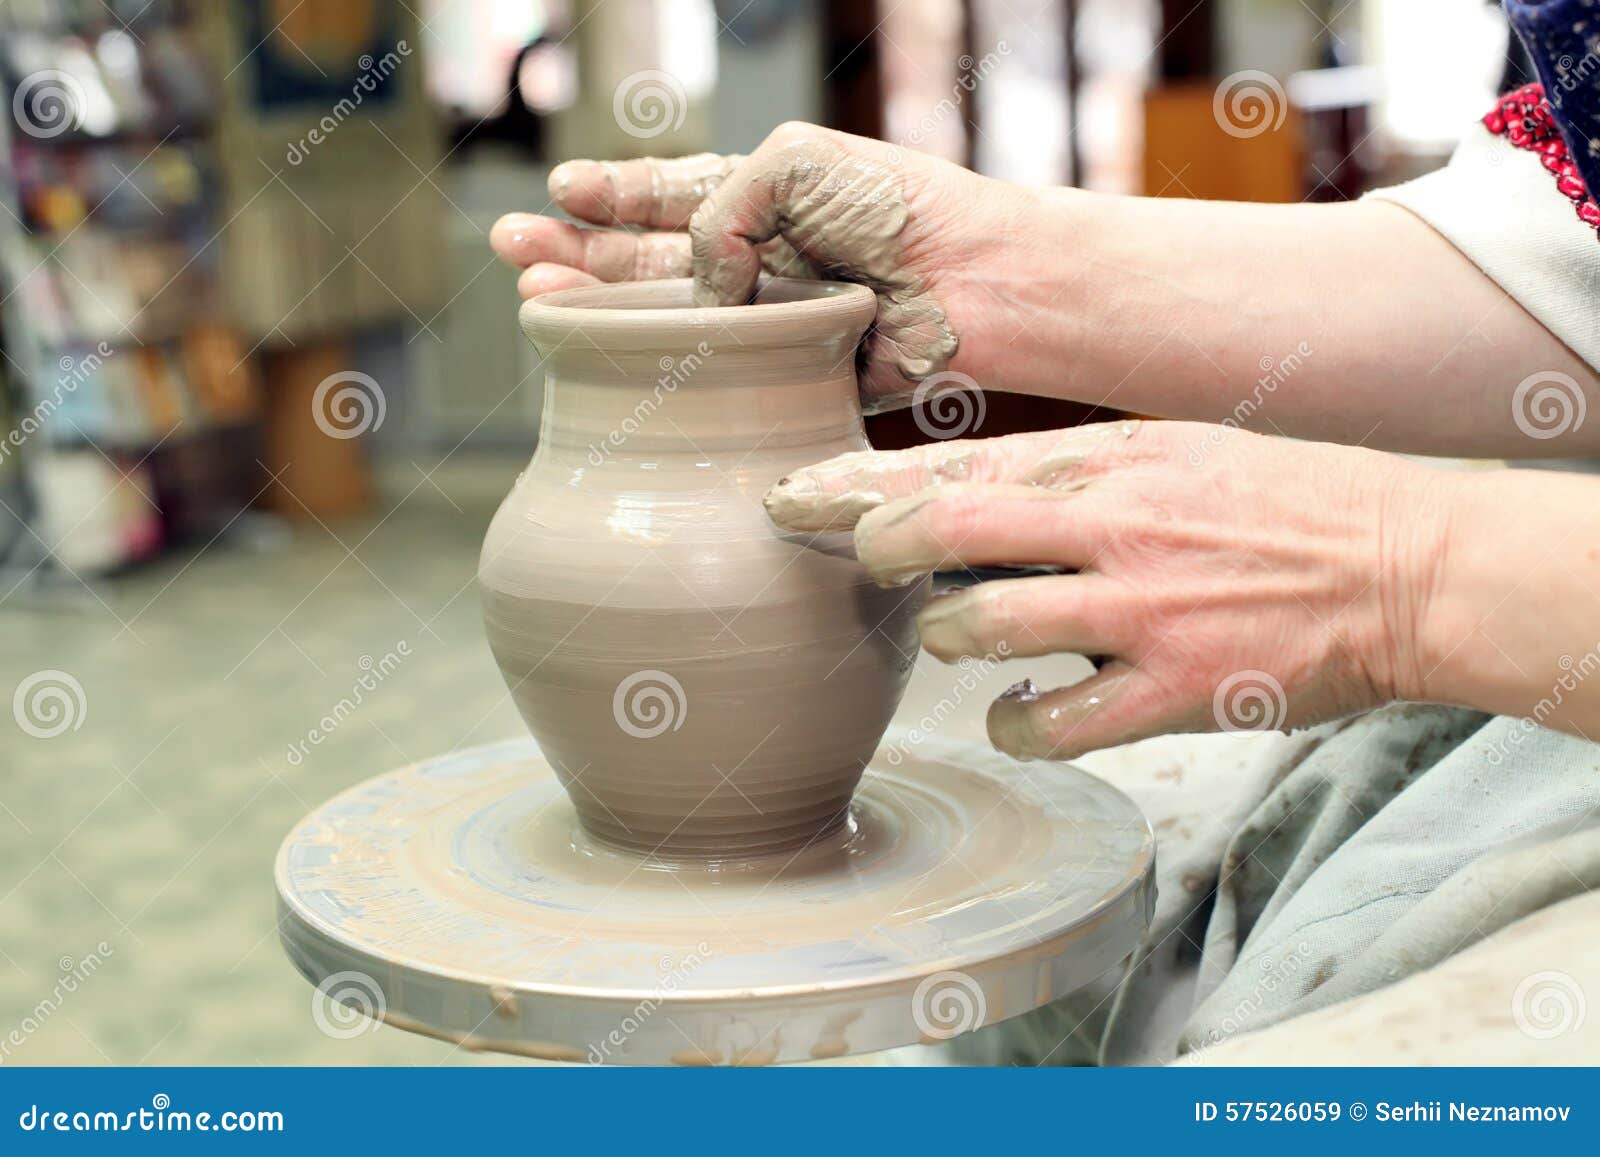  Modeling  Clay  Handmade Pot  Painted Glassware Stock Image 